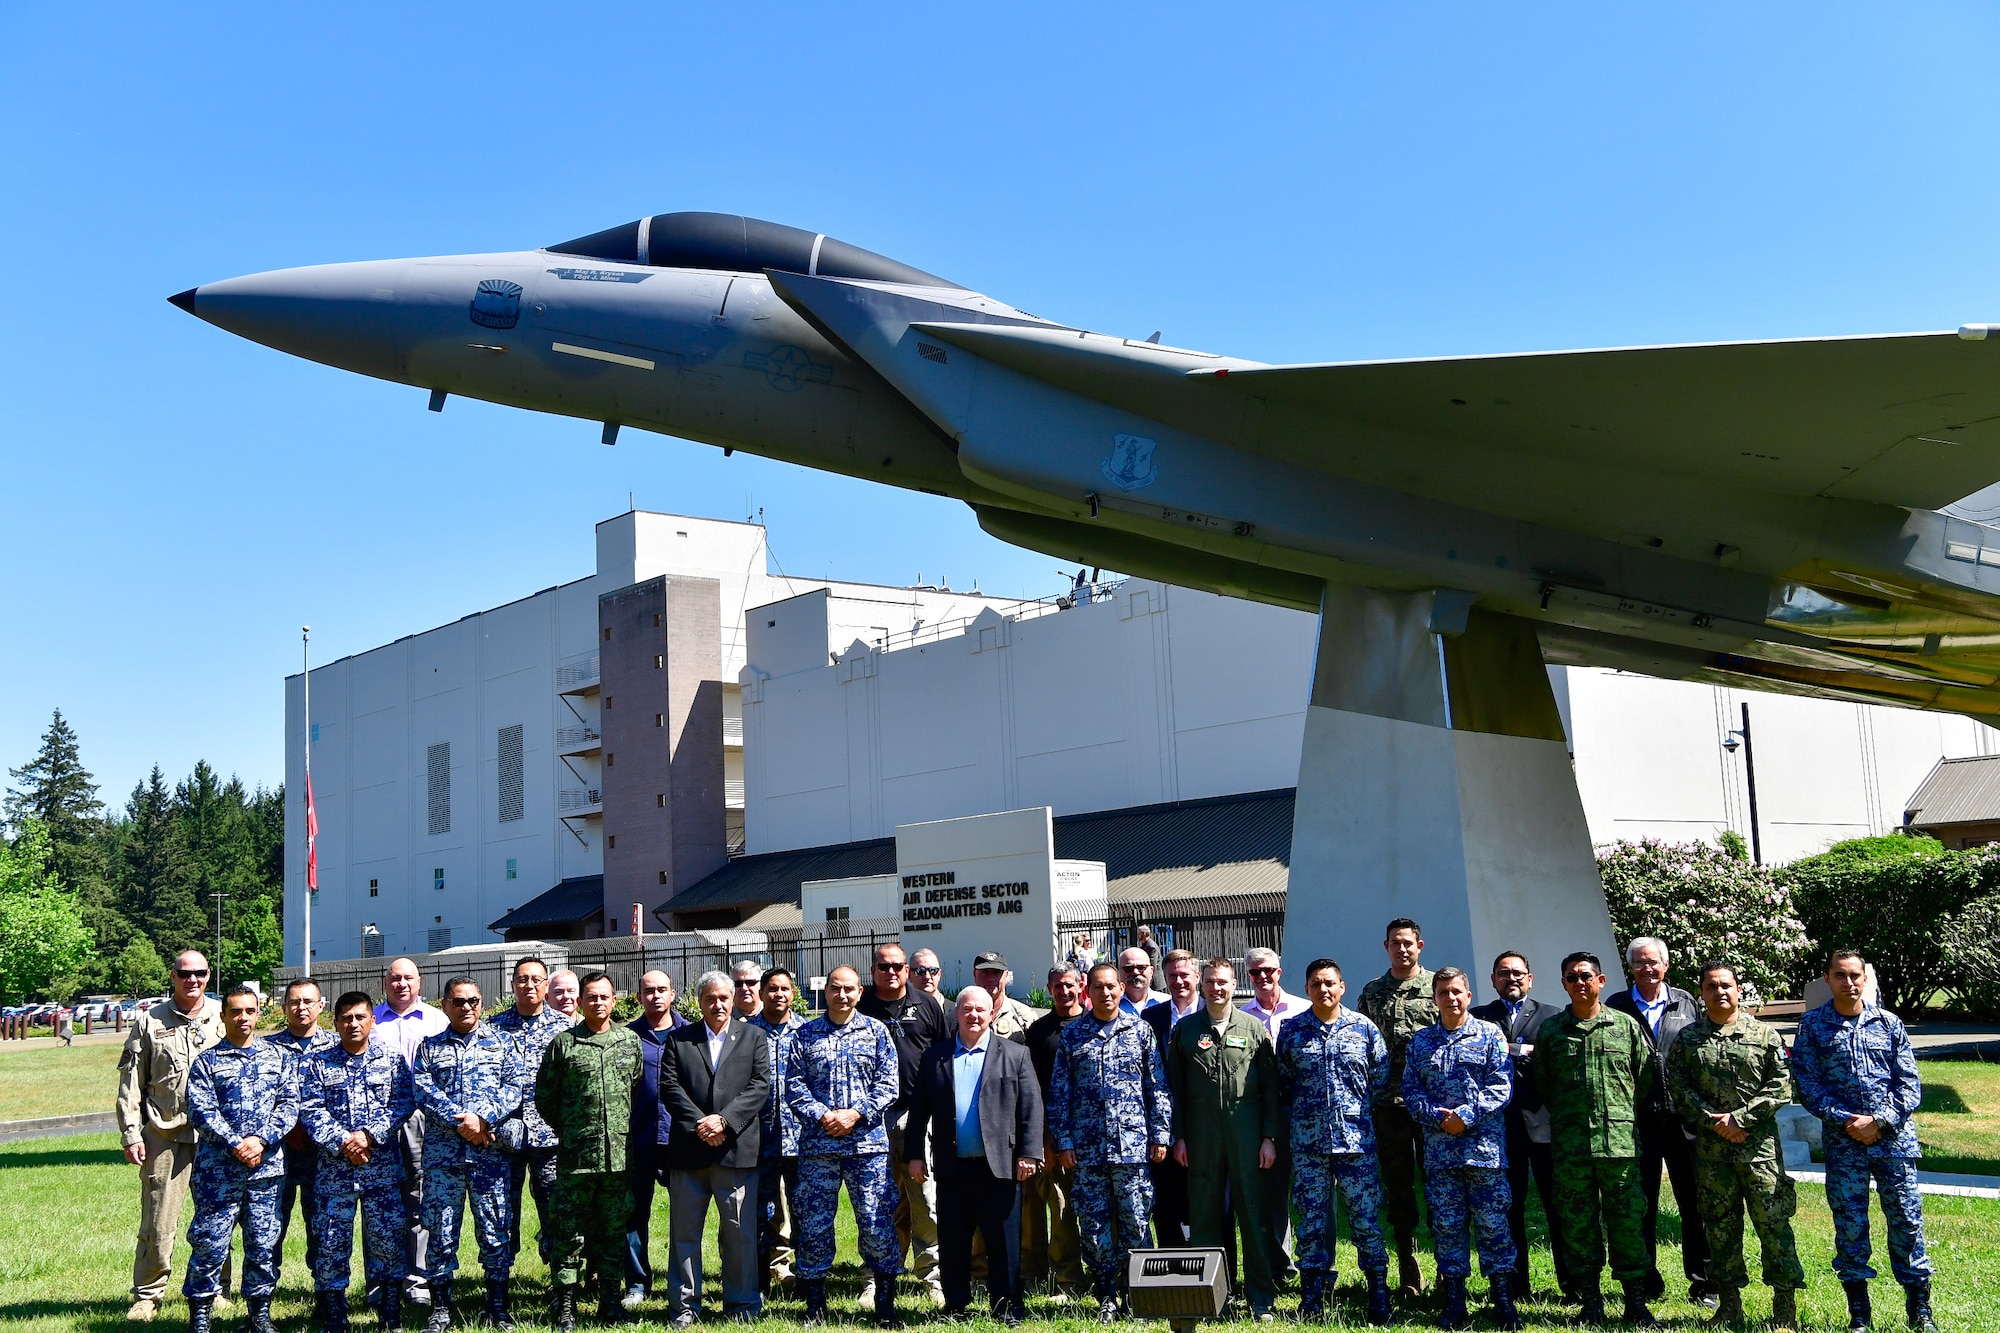 AMALGAM EAGLE 18 exercise planners take a group photo in front of the Western Air Defense Sector Air Park May 22, 2018.  AMALGAM EAGLE 18 is a tactical exercise which is designed to enhance mutual warning and information sharing procedures in support of a cooperative response to illicit flights that cross the U.S.-Mexico border.